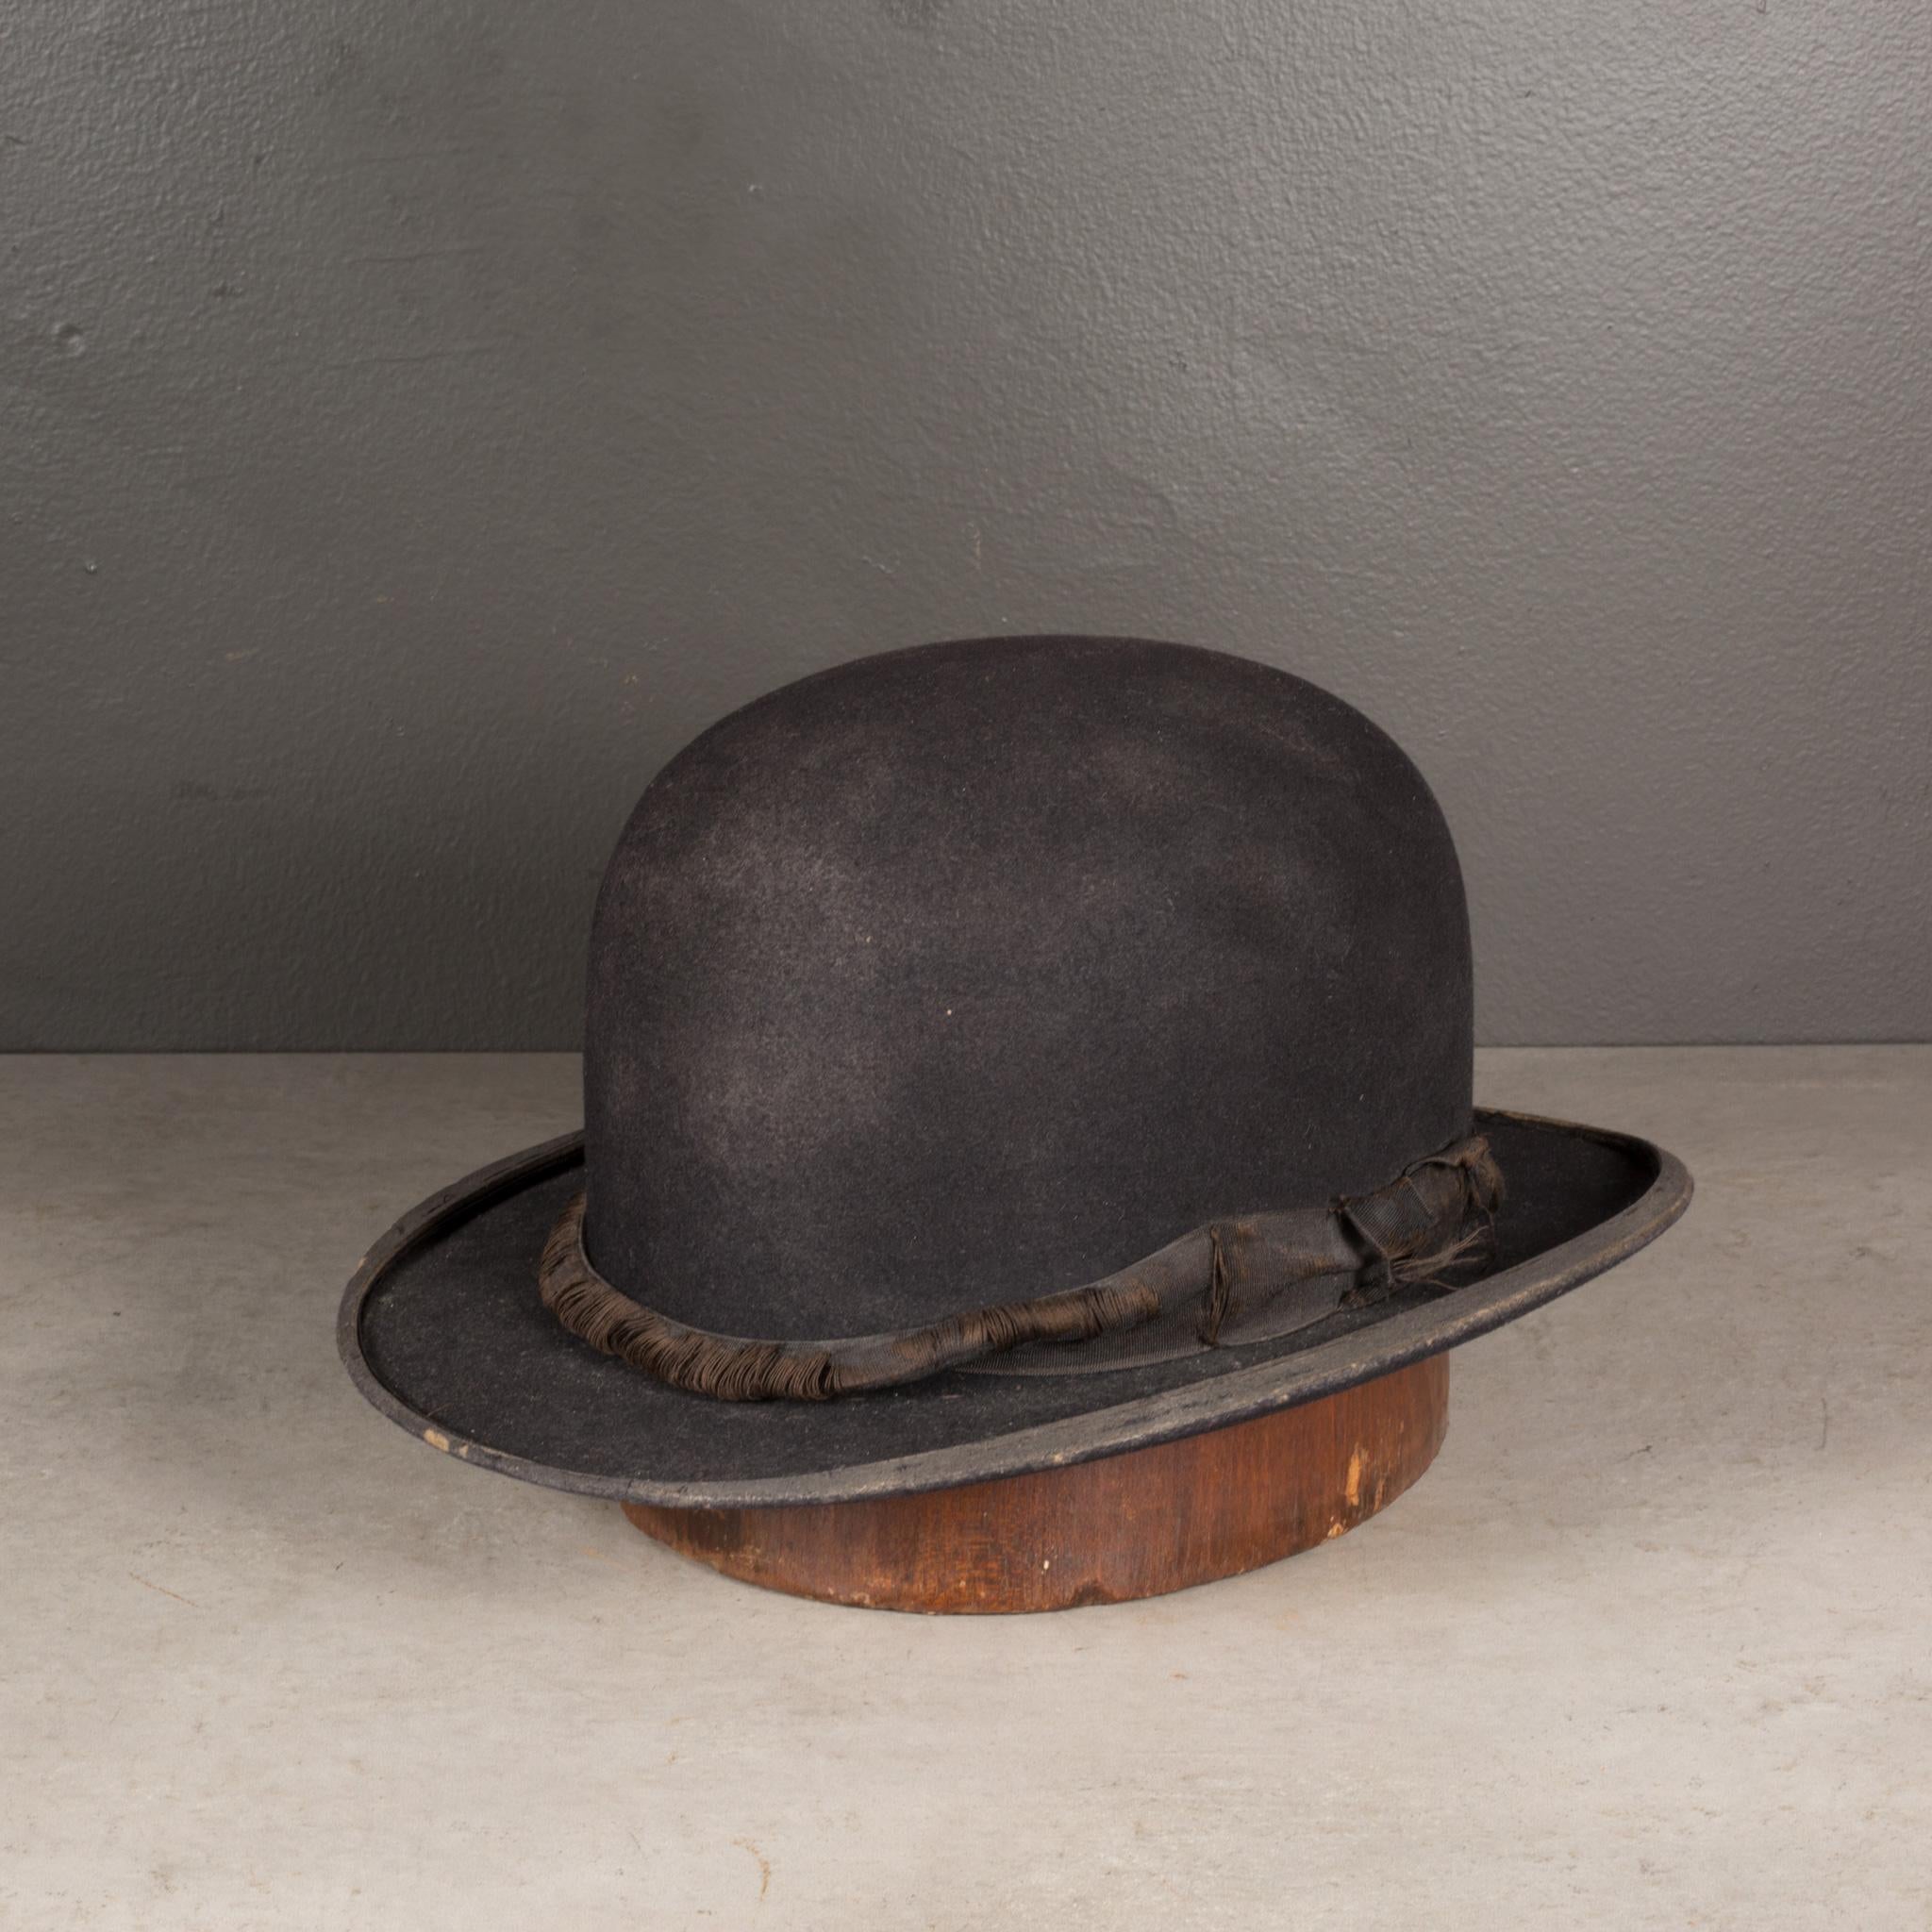 ABOUT

An original wool bowler hat. Hat block not included.

 CREATOR Unknown.
 DATE OF MANUFACTURE c.1920-1940.
 MATERIALS AND TECHNIQUES Wool.
 CONDITION Good. Wear consistent with age and use.
 DIMENSIONS H 5 in. D 10 in. W 12